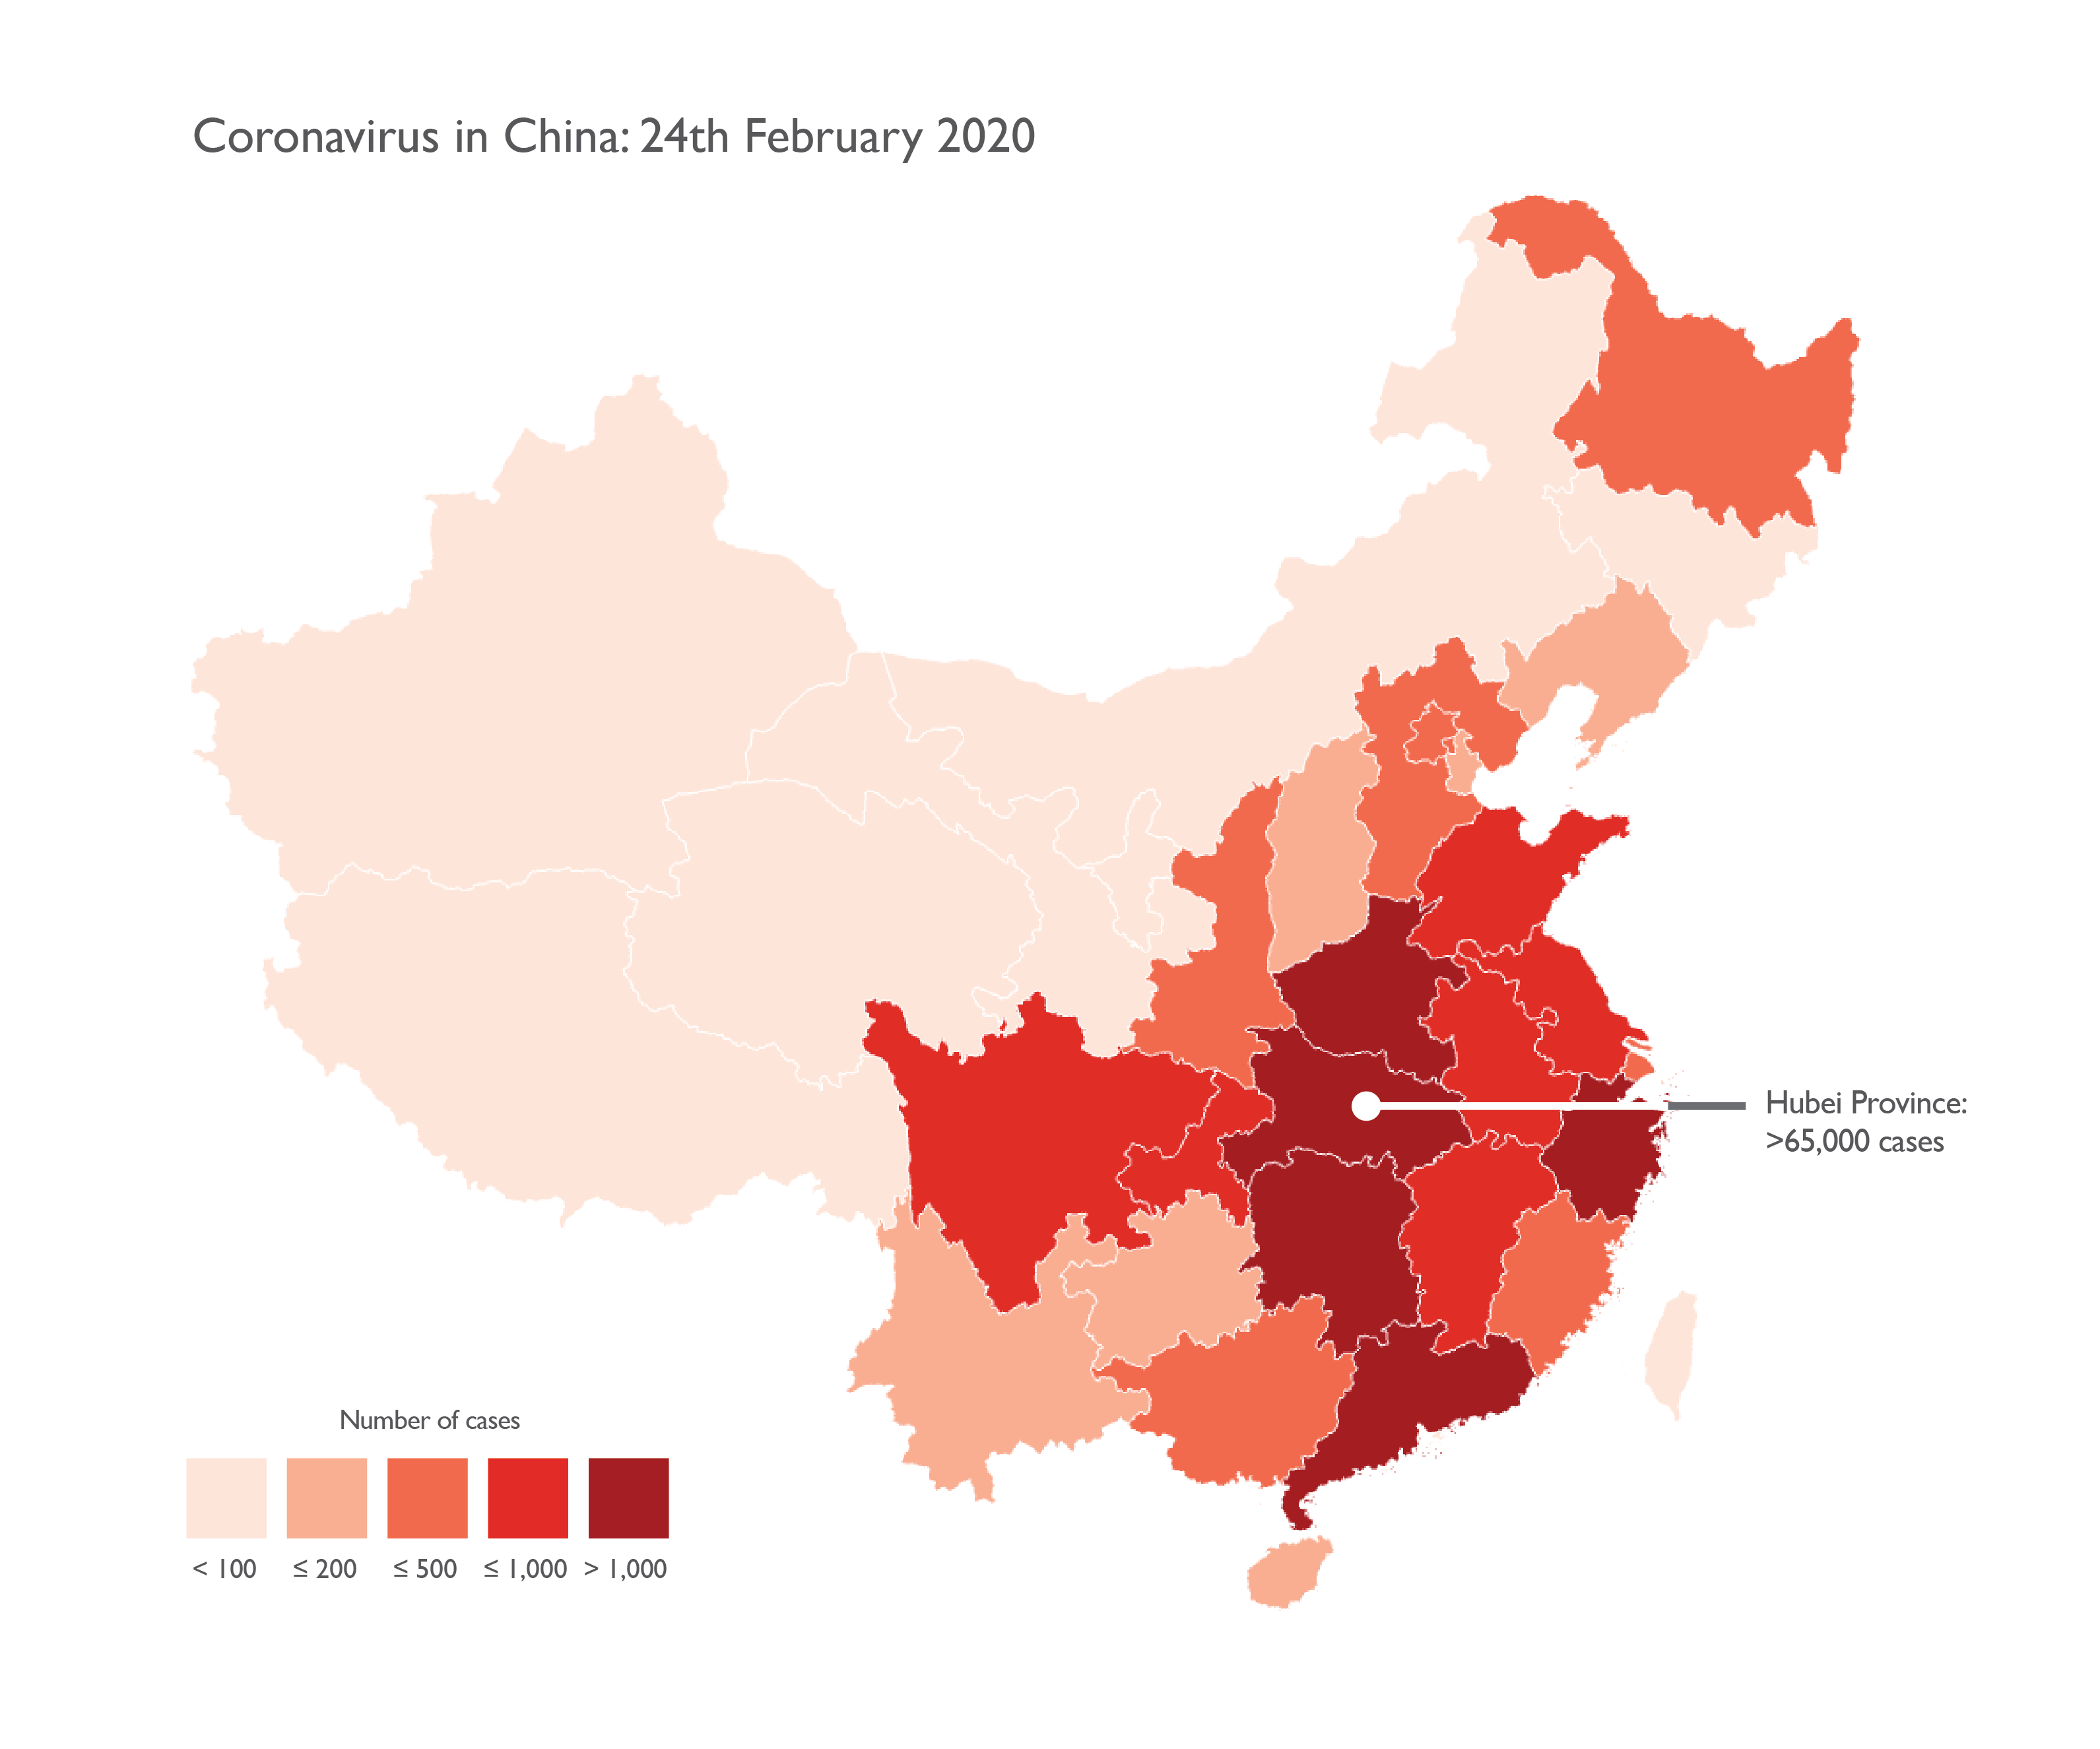 red map of China showing total Coronavirus cases per province